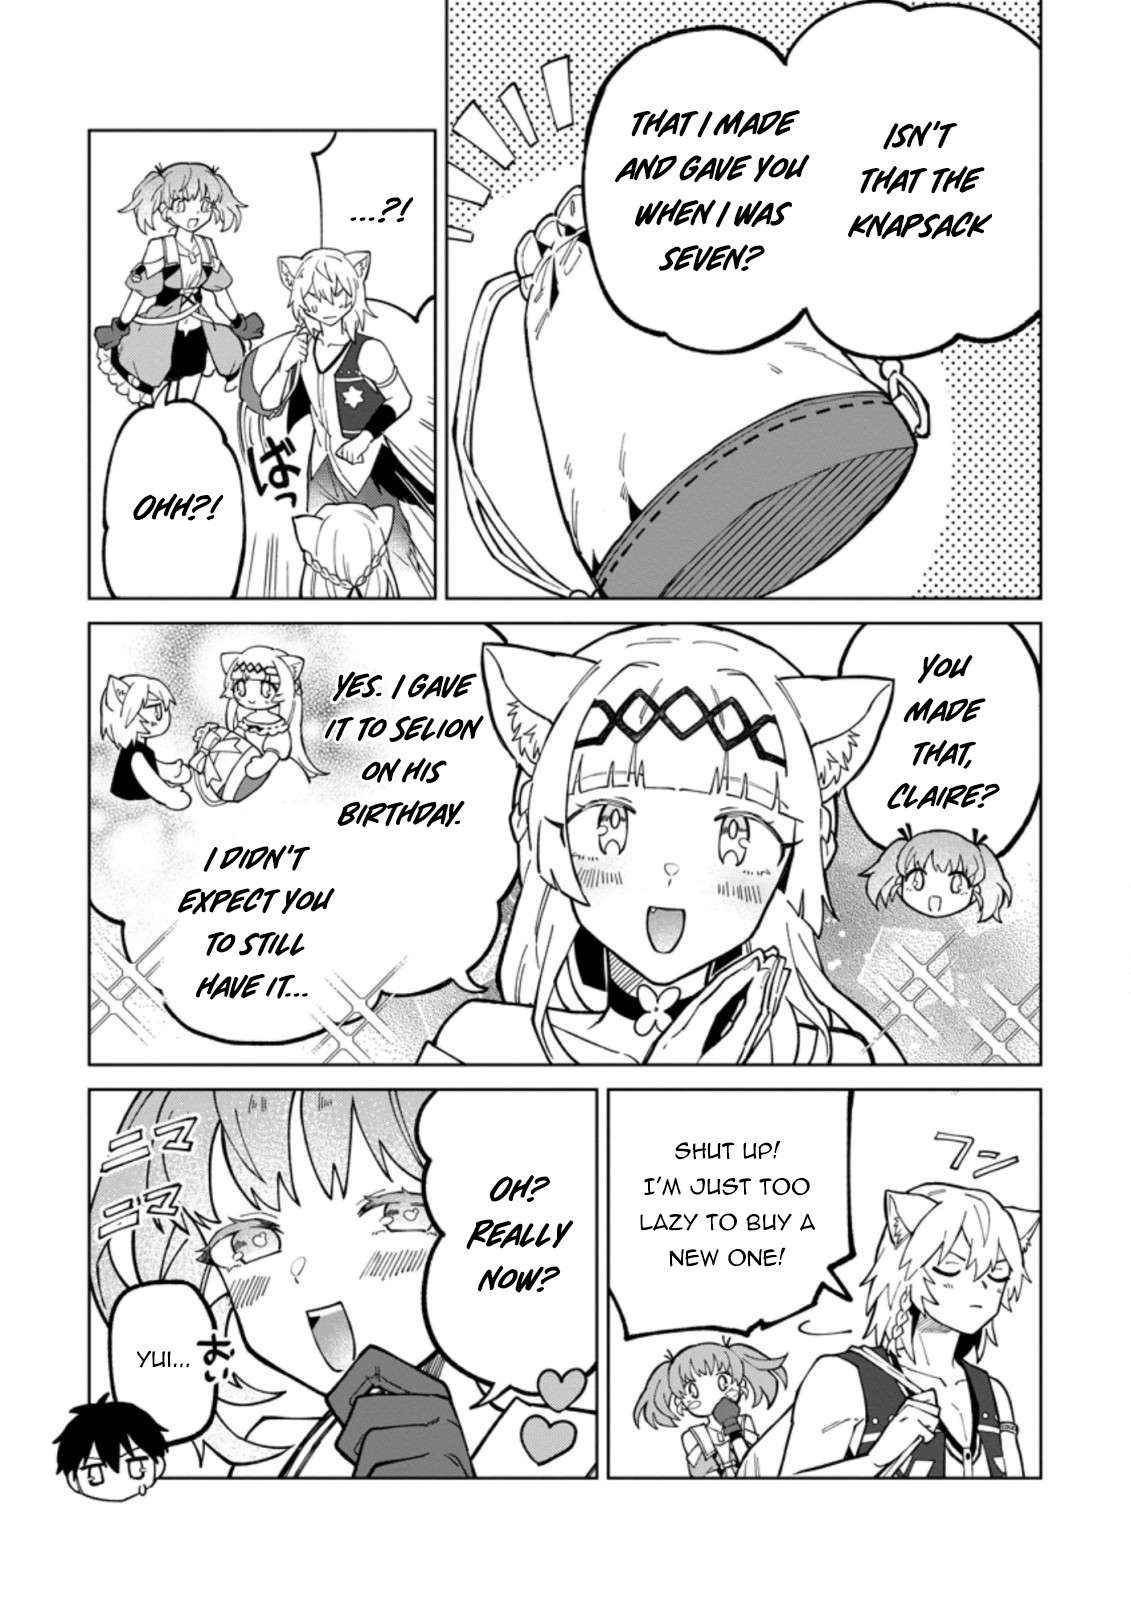 The White Mage Who Was Banished From The Hero's Party Is Picked Up By An S Rank Adventurer~ This White Mage Is Too Out Of The Ordinary! - 19.1 page 4-a0f9451f